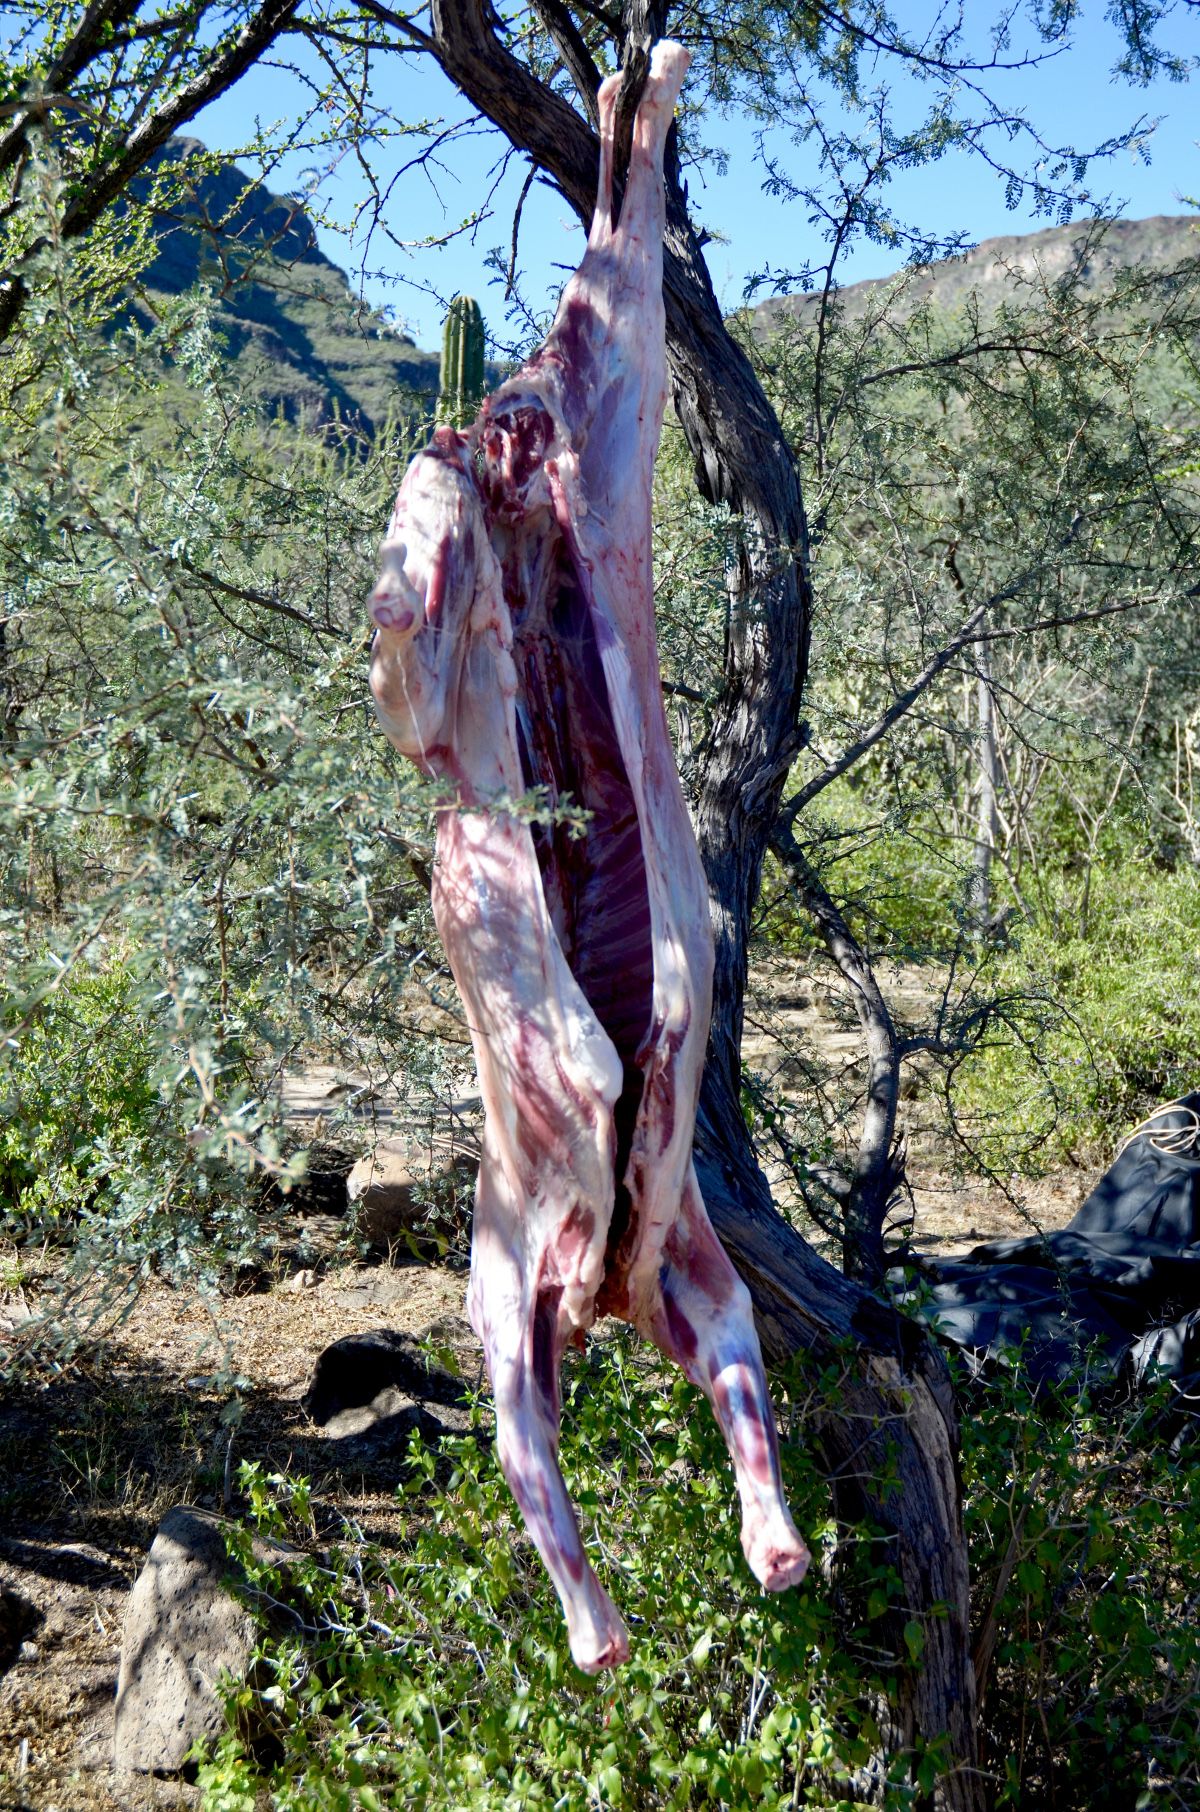 bloody skinned goat hanging from a tree in Baja